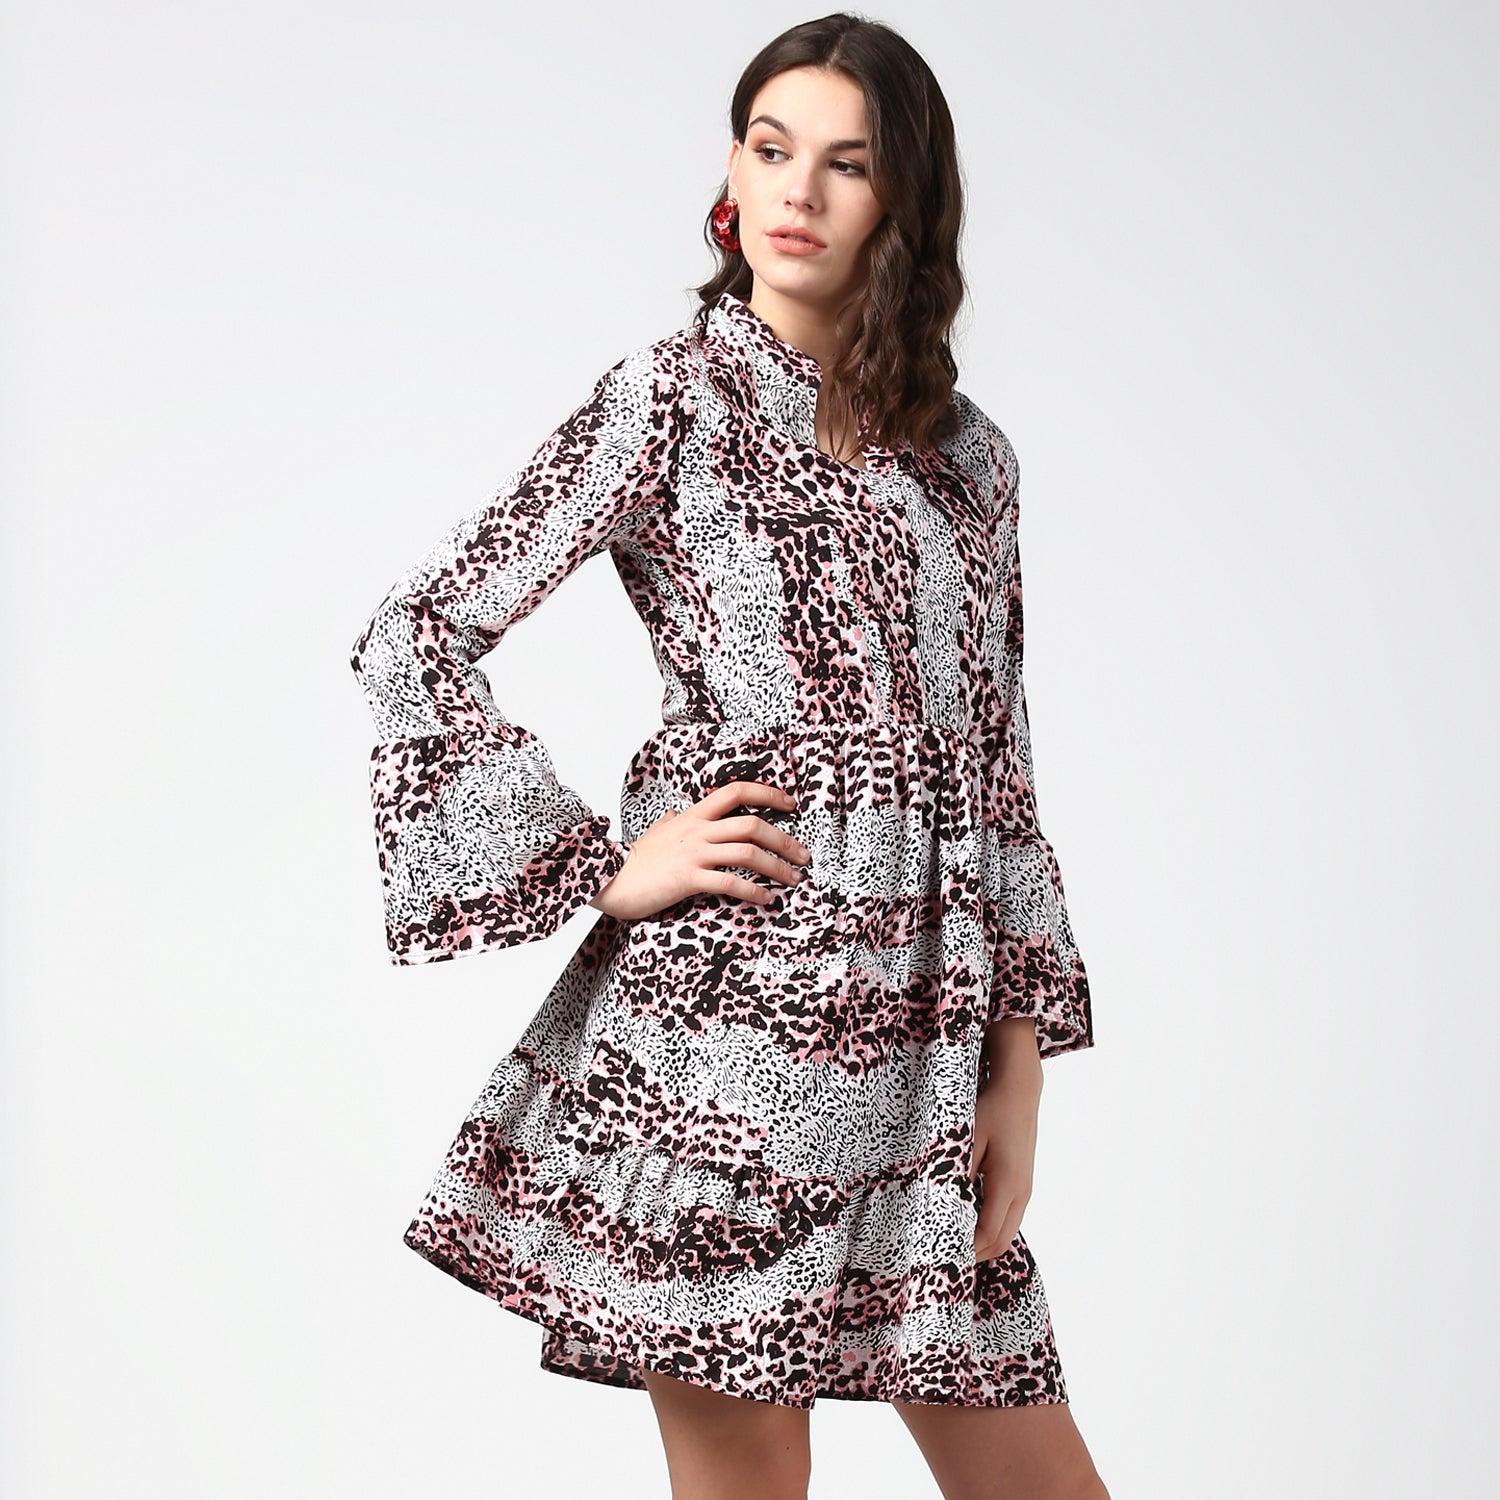 Women's Pink and Black Animal Print Dress with Bell Sleeves - StyleStone